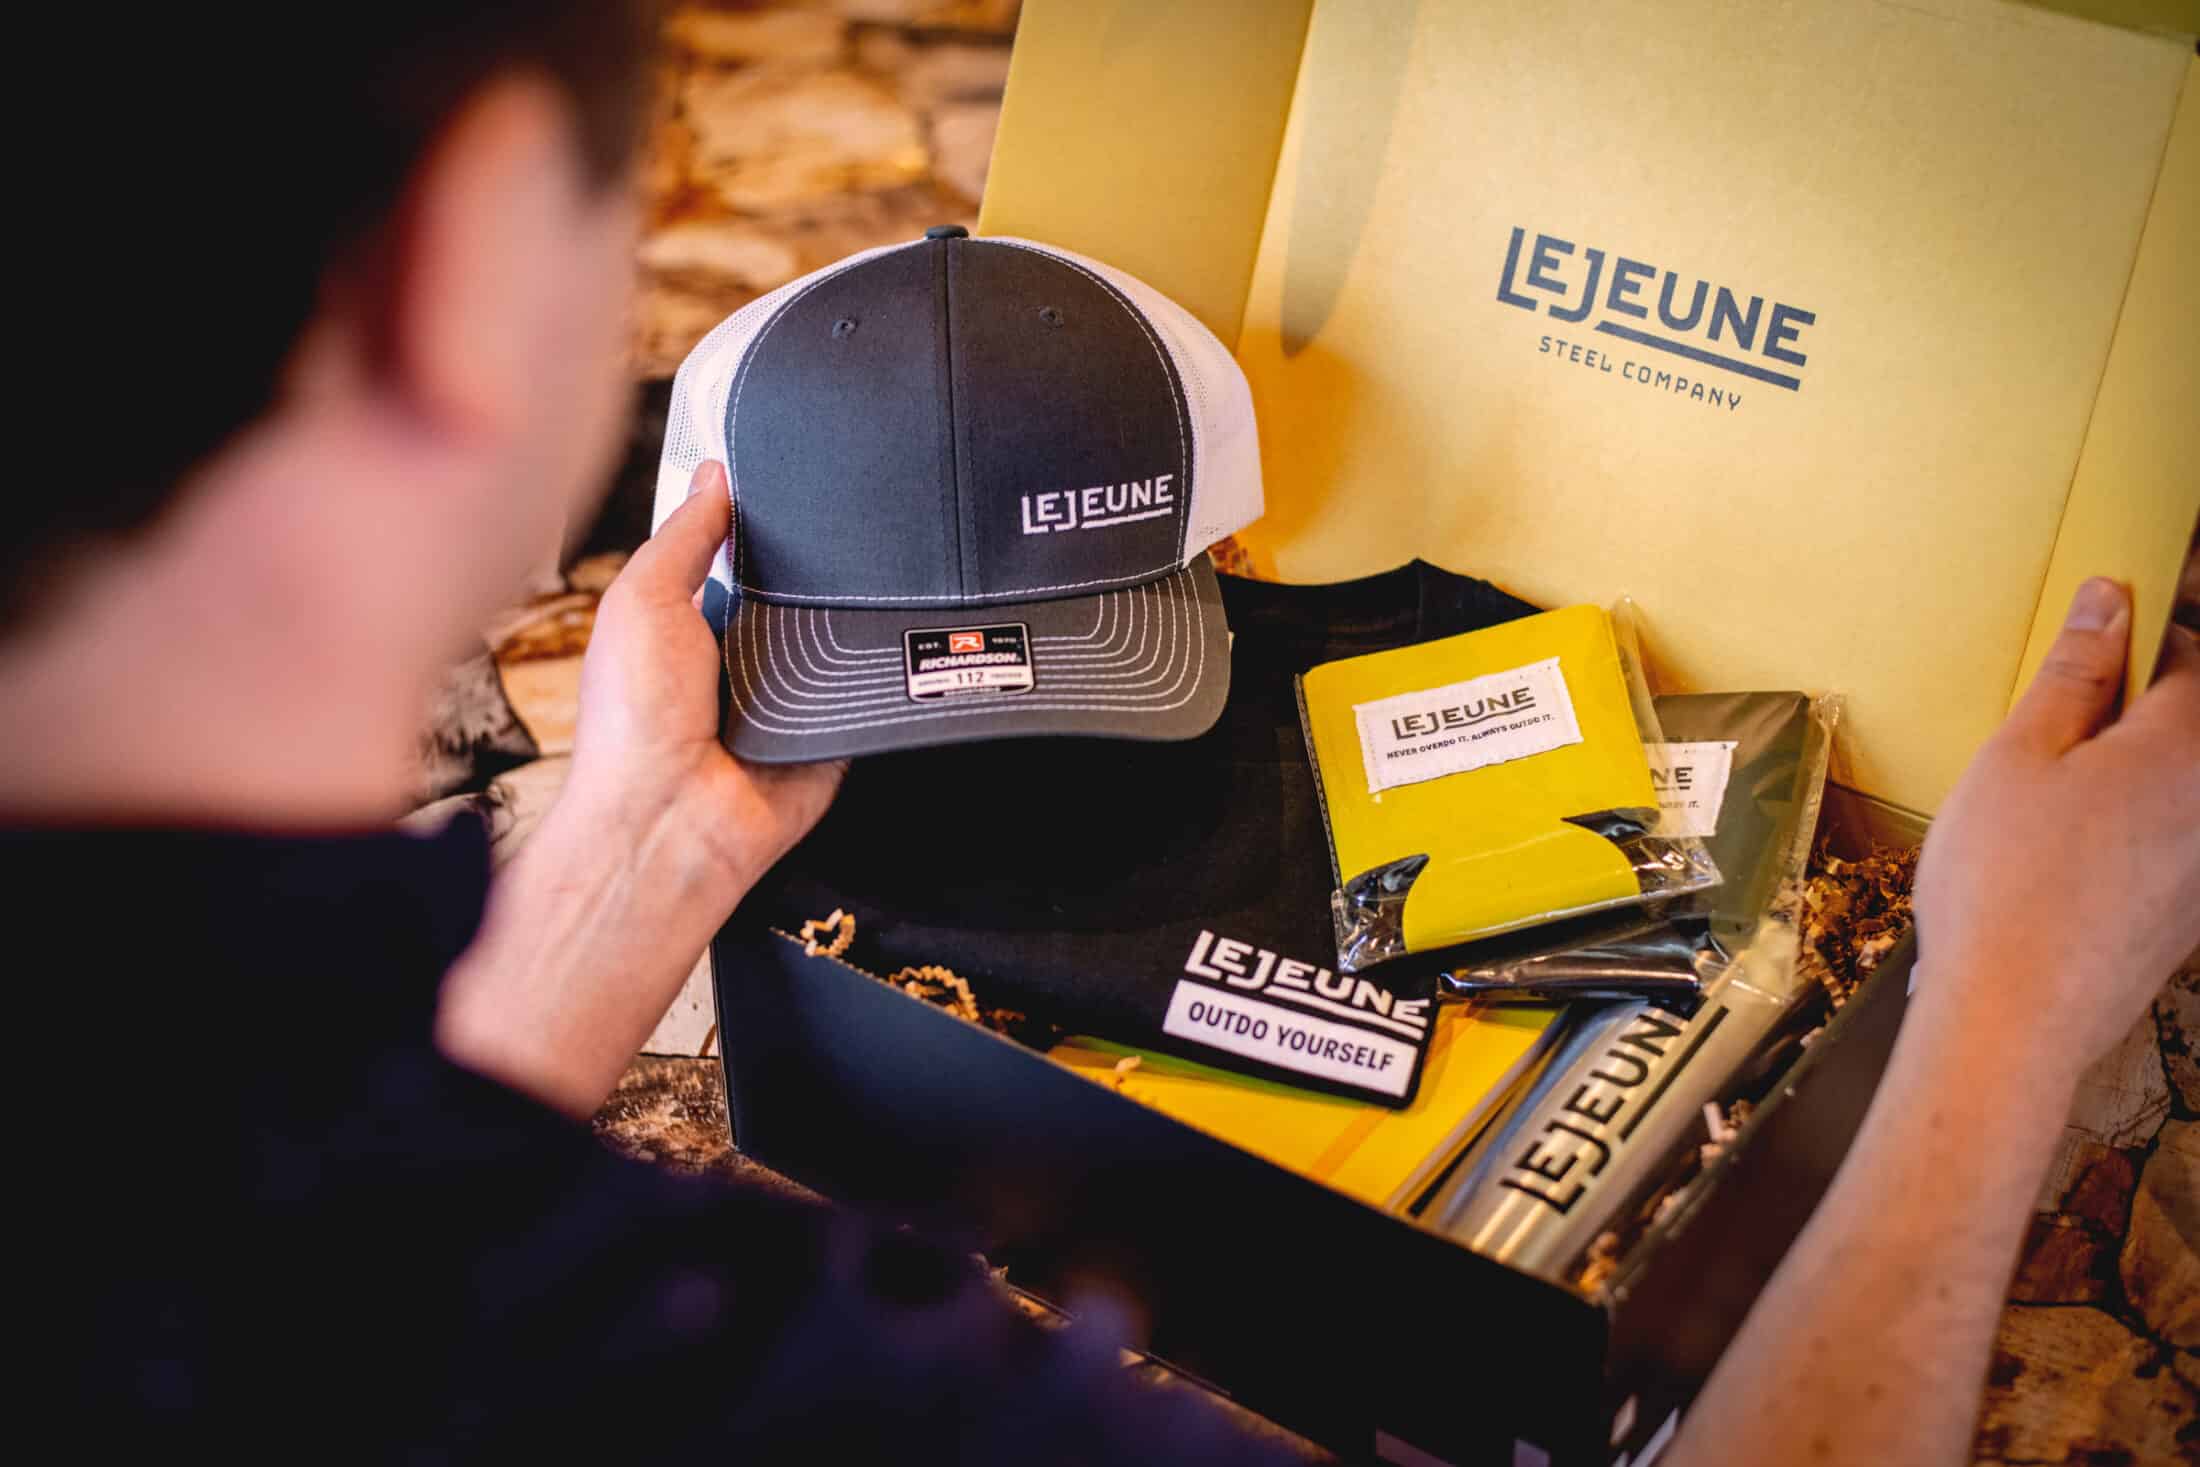 Man opening a gift box of company-branded items including a hat, water bottle, shirt and koozie.